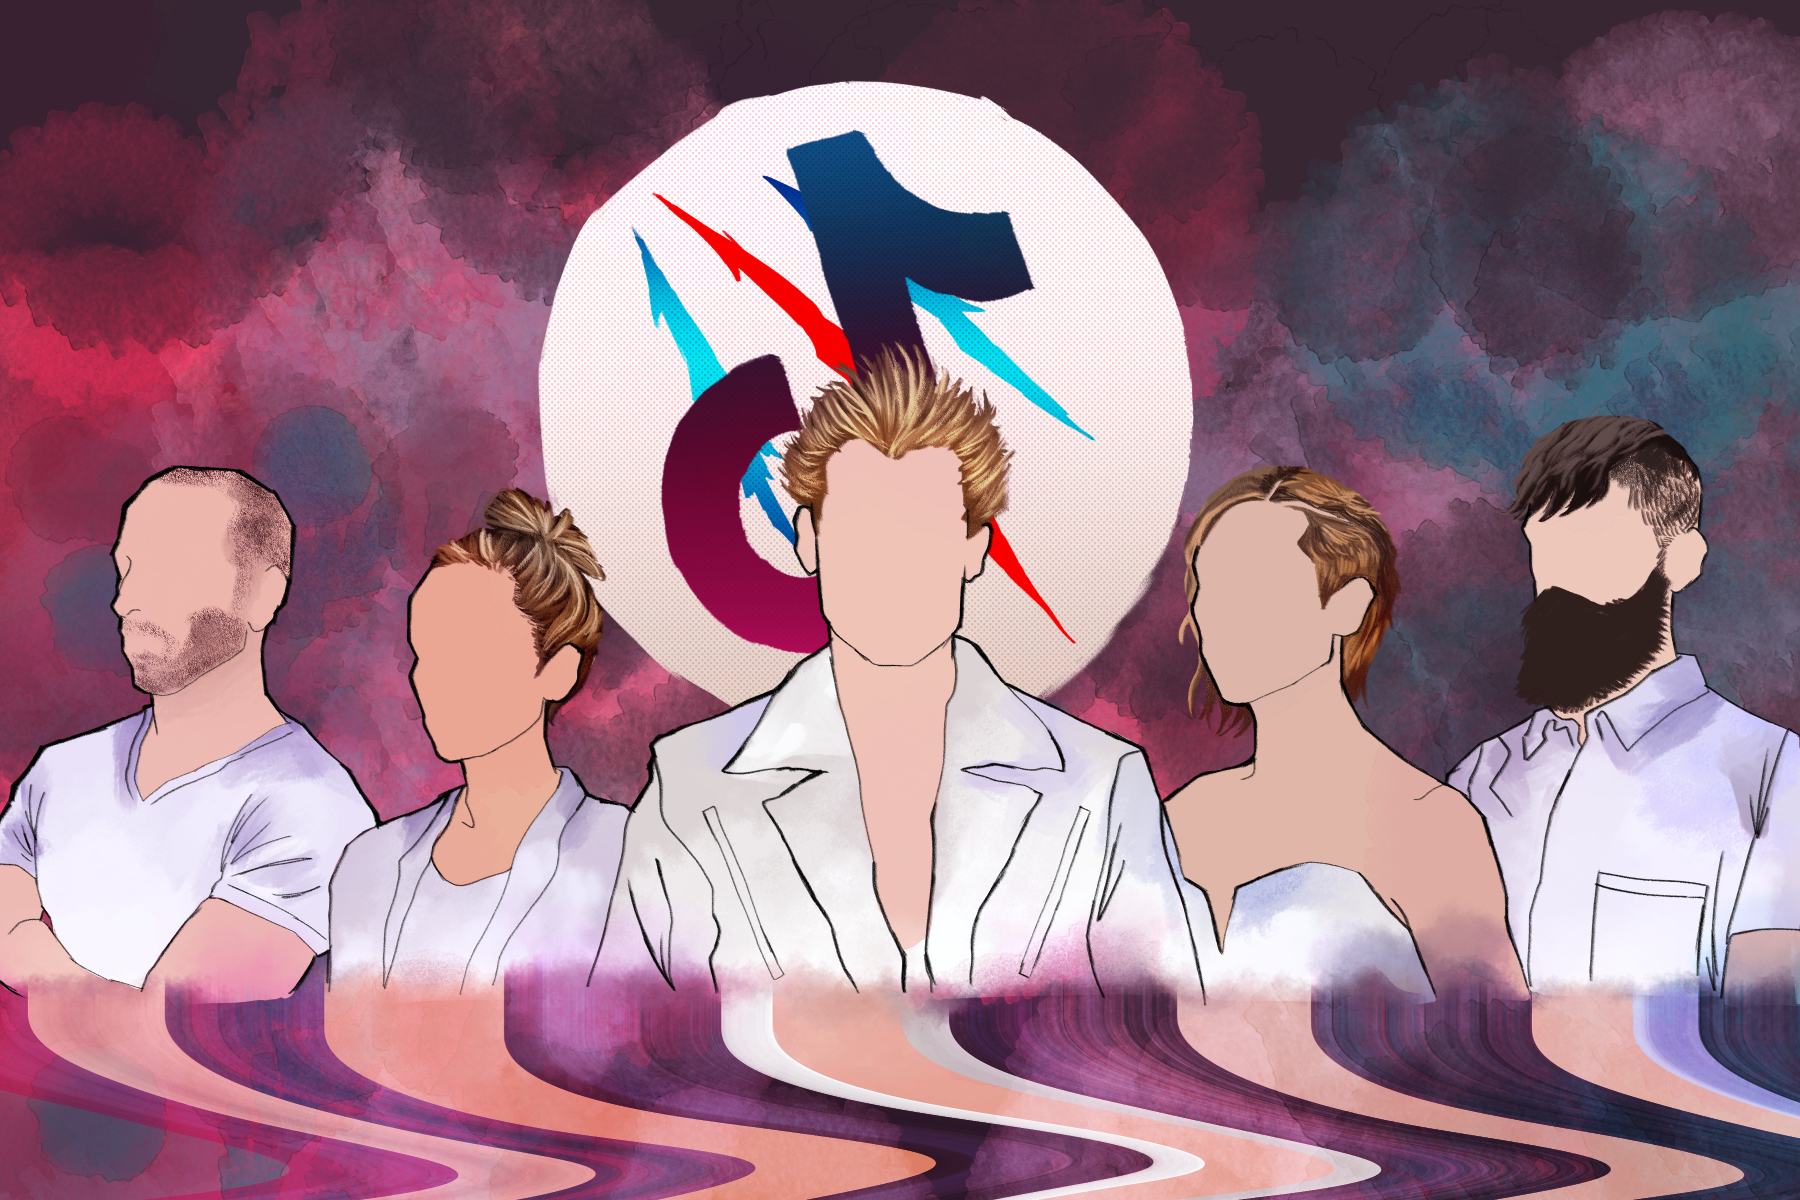 An art piece of the band Mother Mother in front of the TikTok logo.